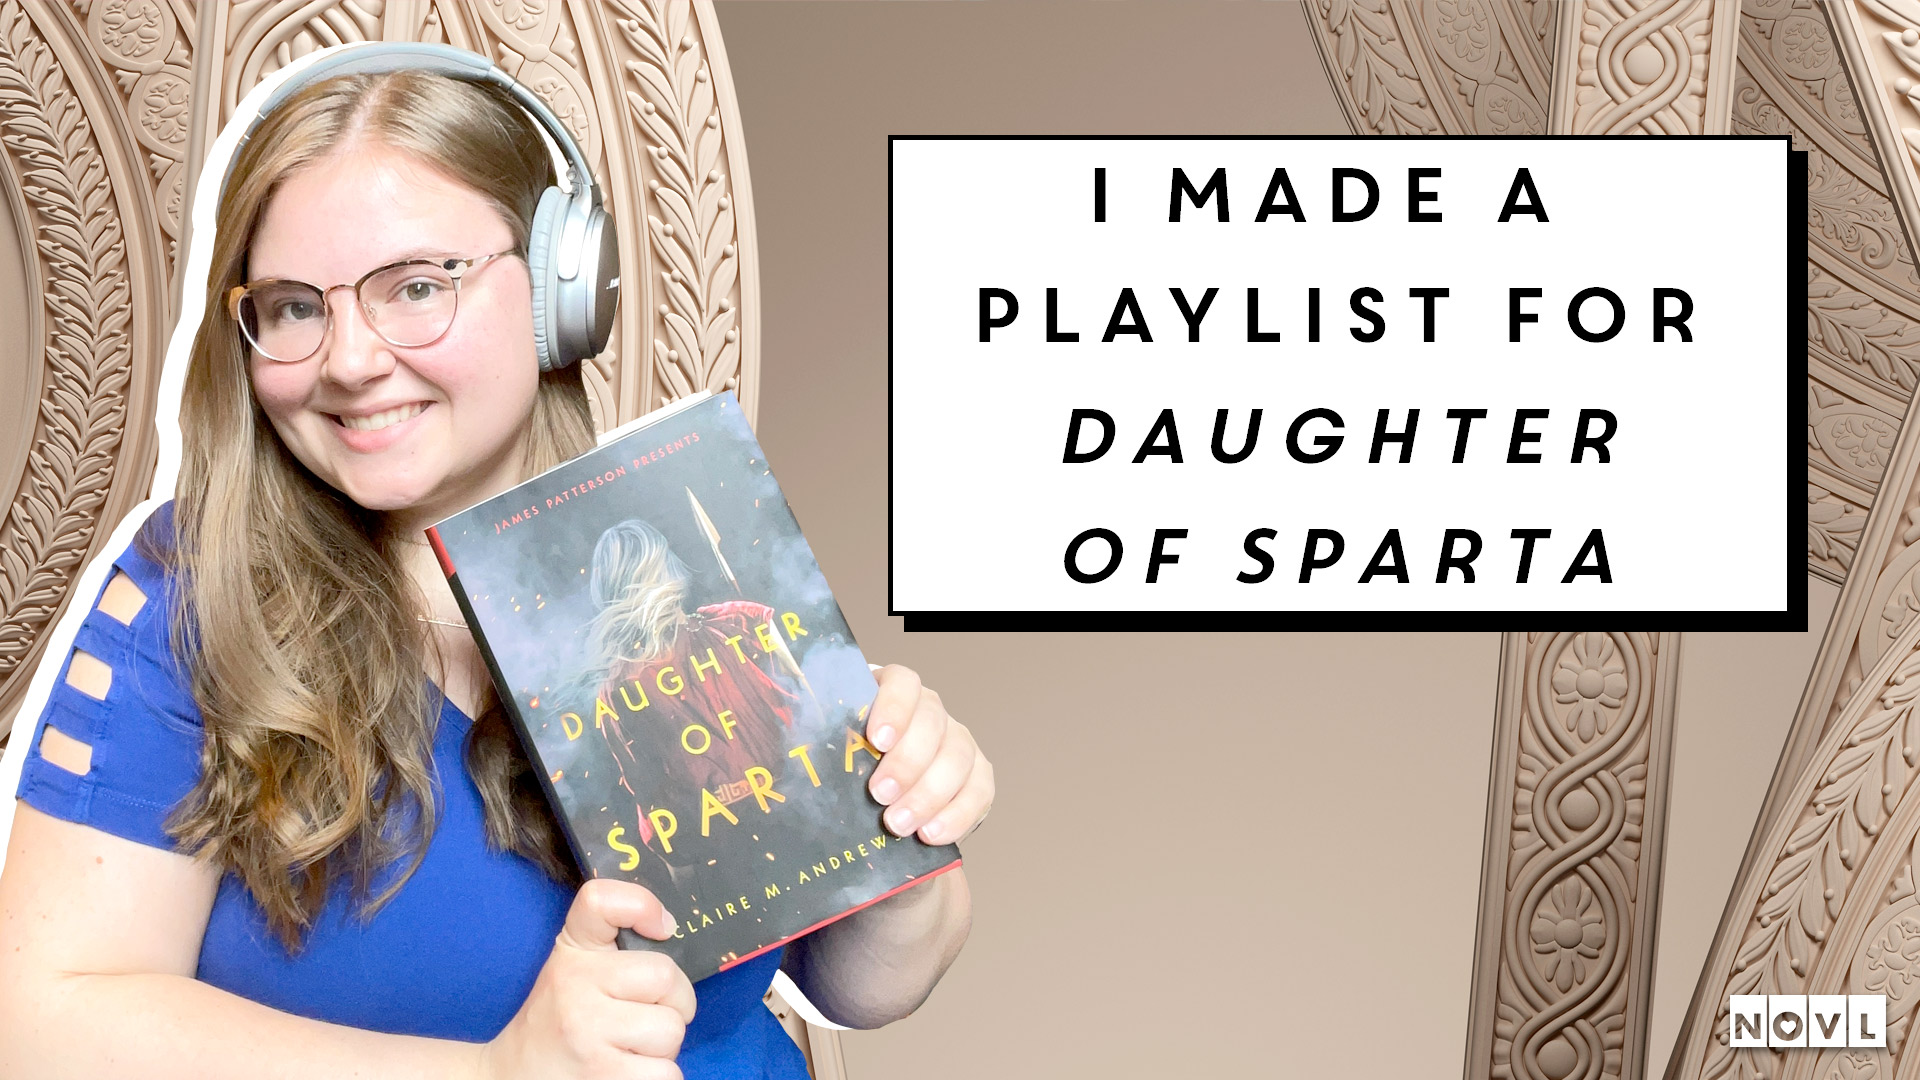 The NOVL Blog, Featured Image for Article: I Made a Playlist for Daughter of Sparta